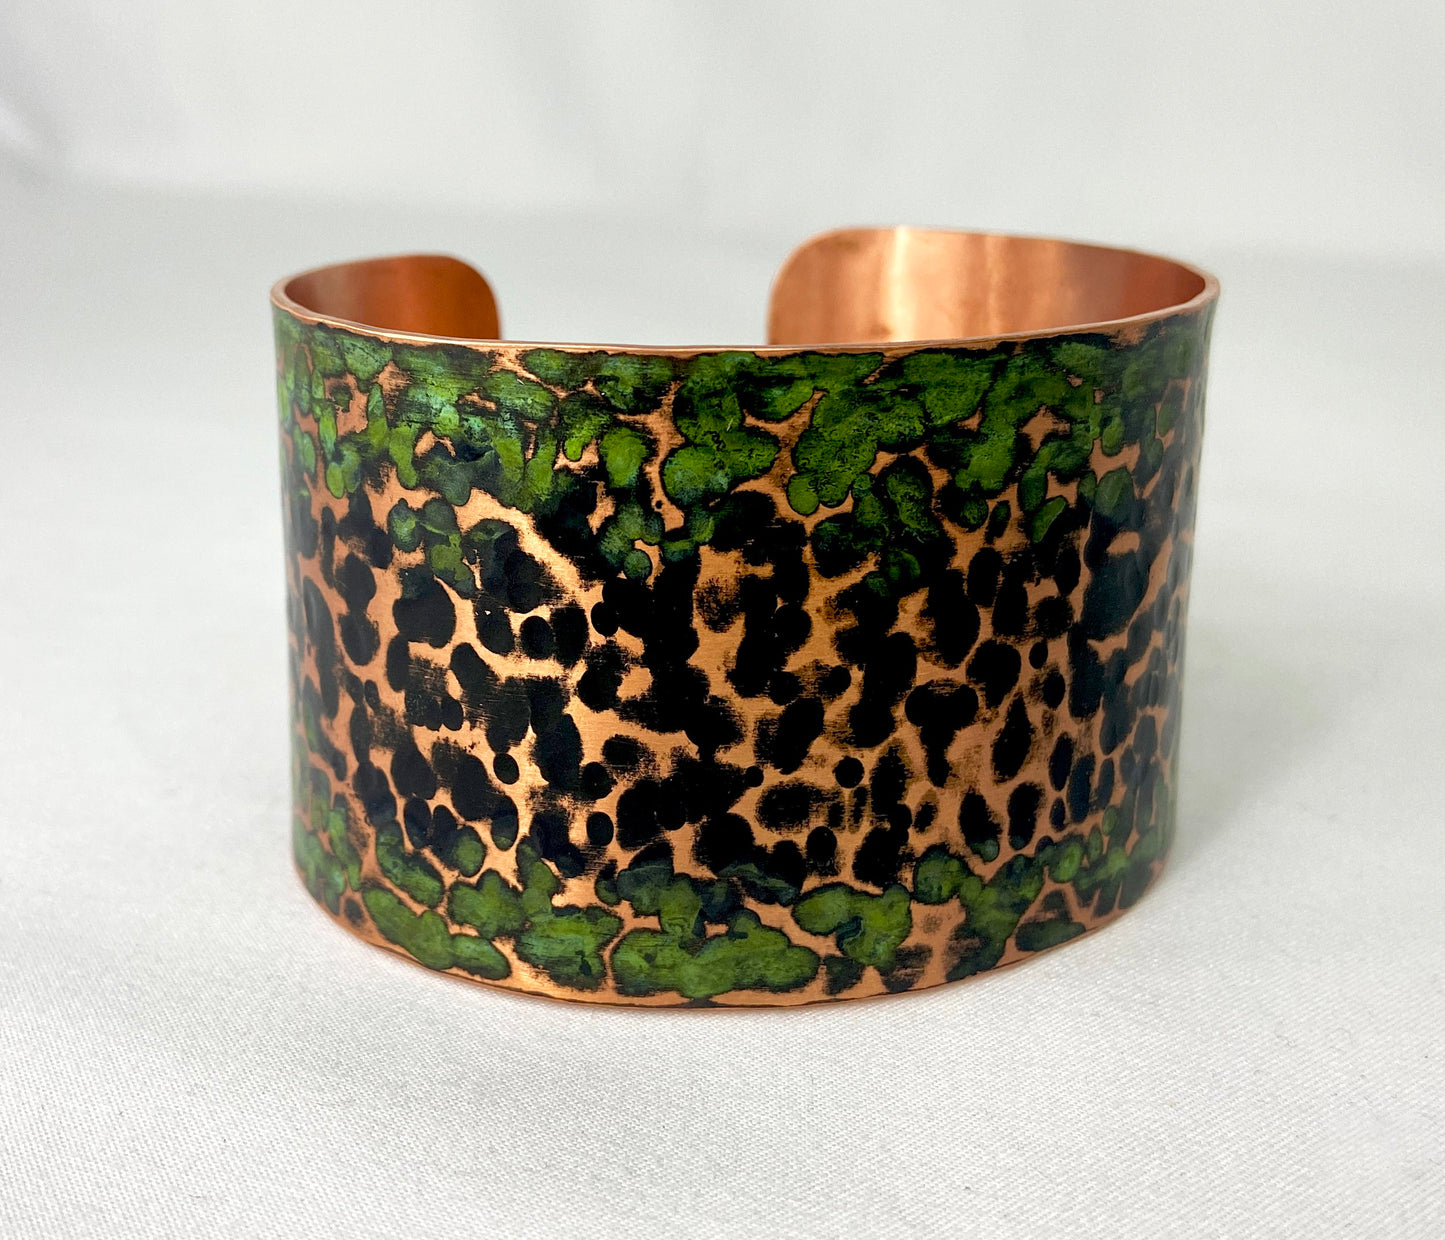 Large sized Hammered Copper Cuff Bracelet with Antique and Green